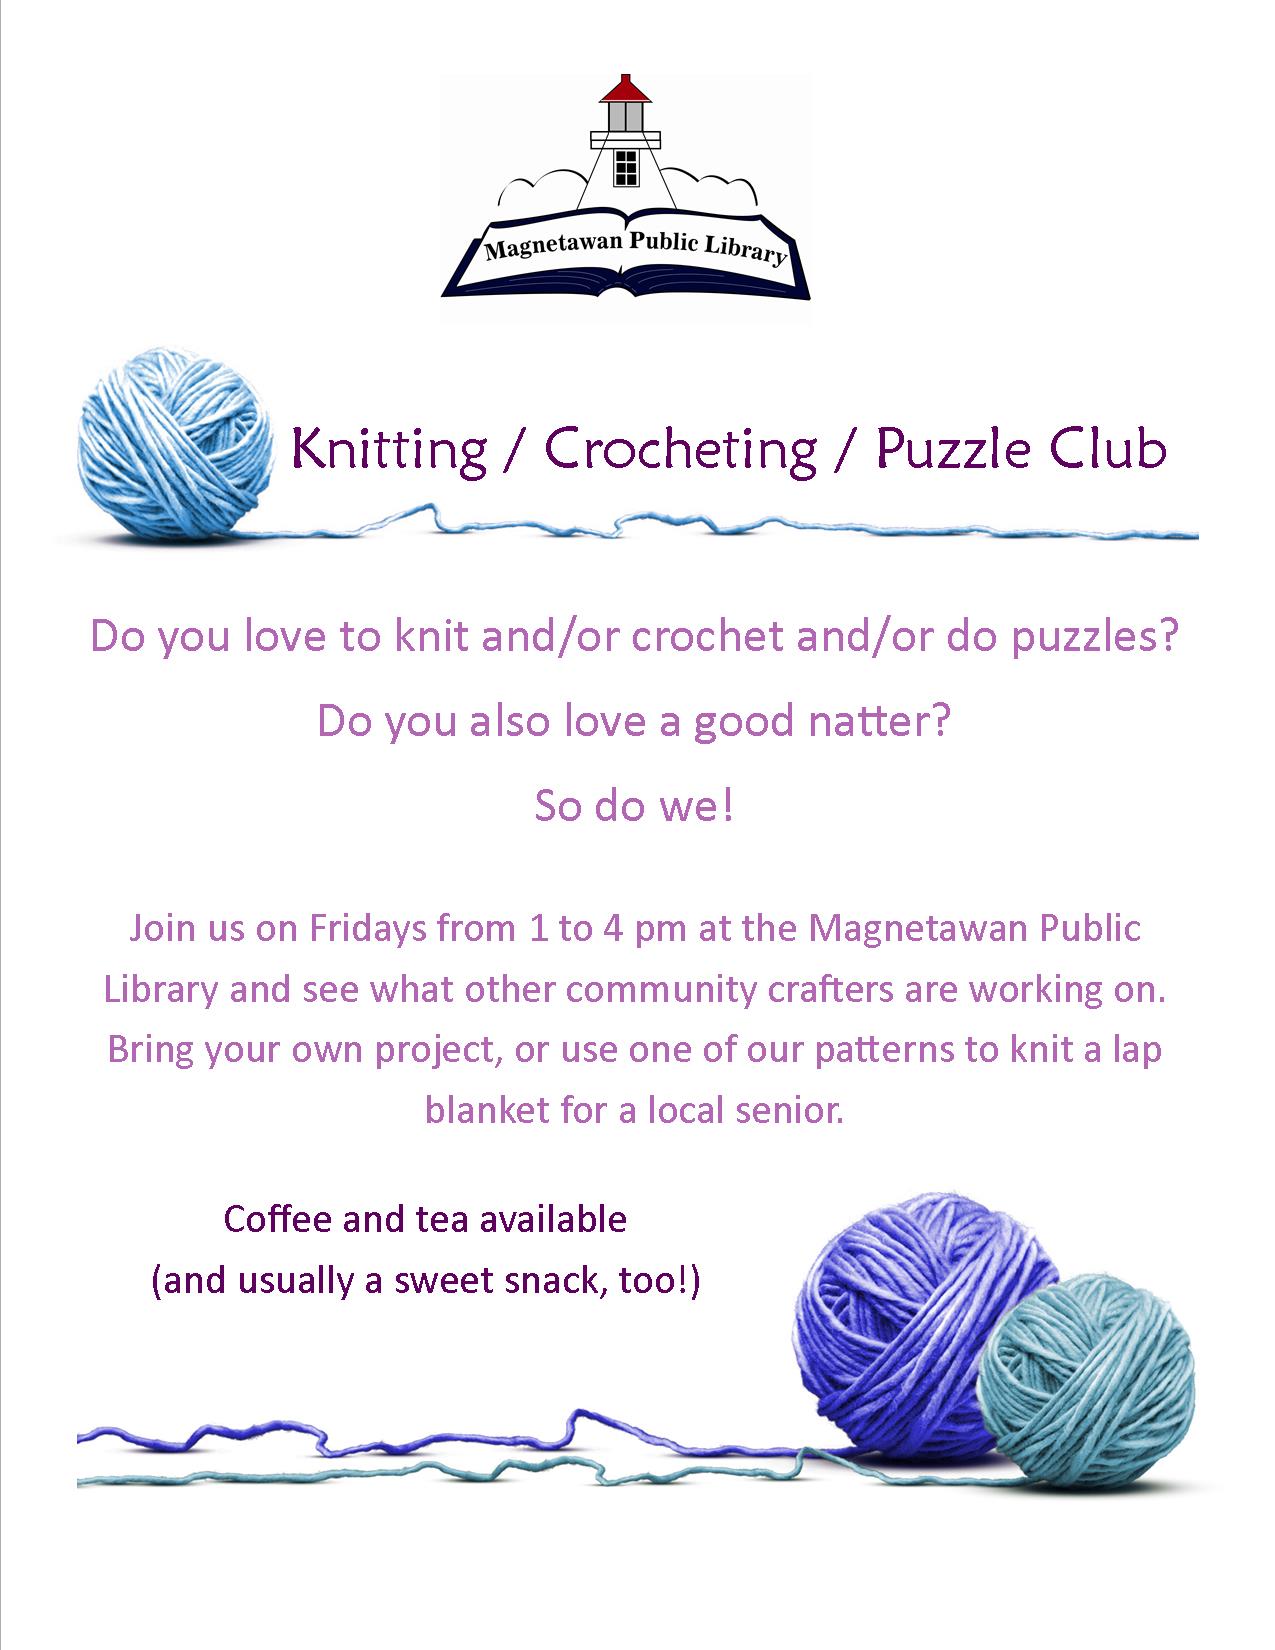 Knitting / Crocheting / Puzzle Club poster